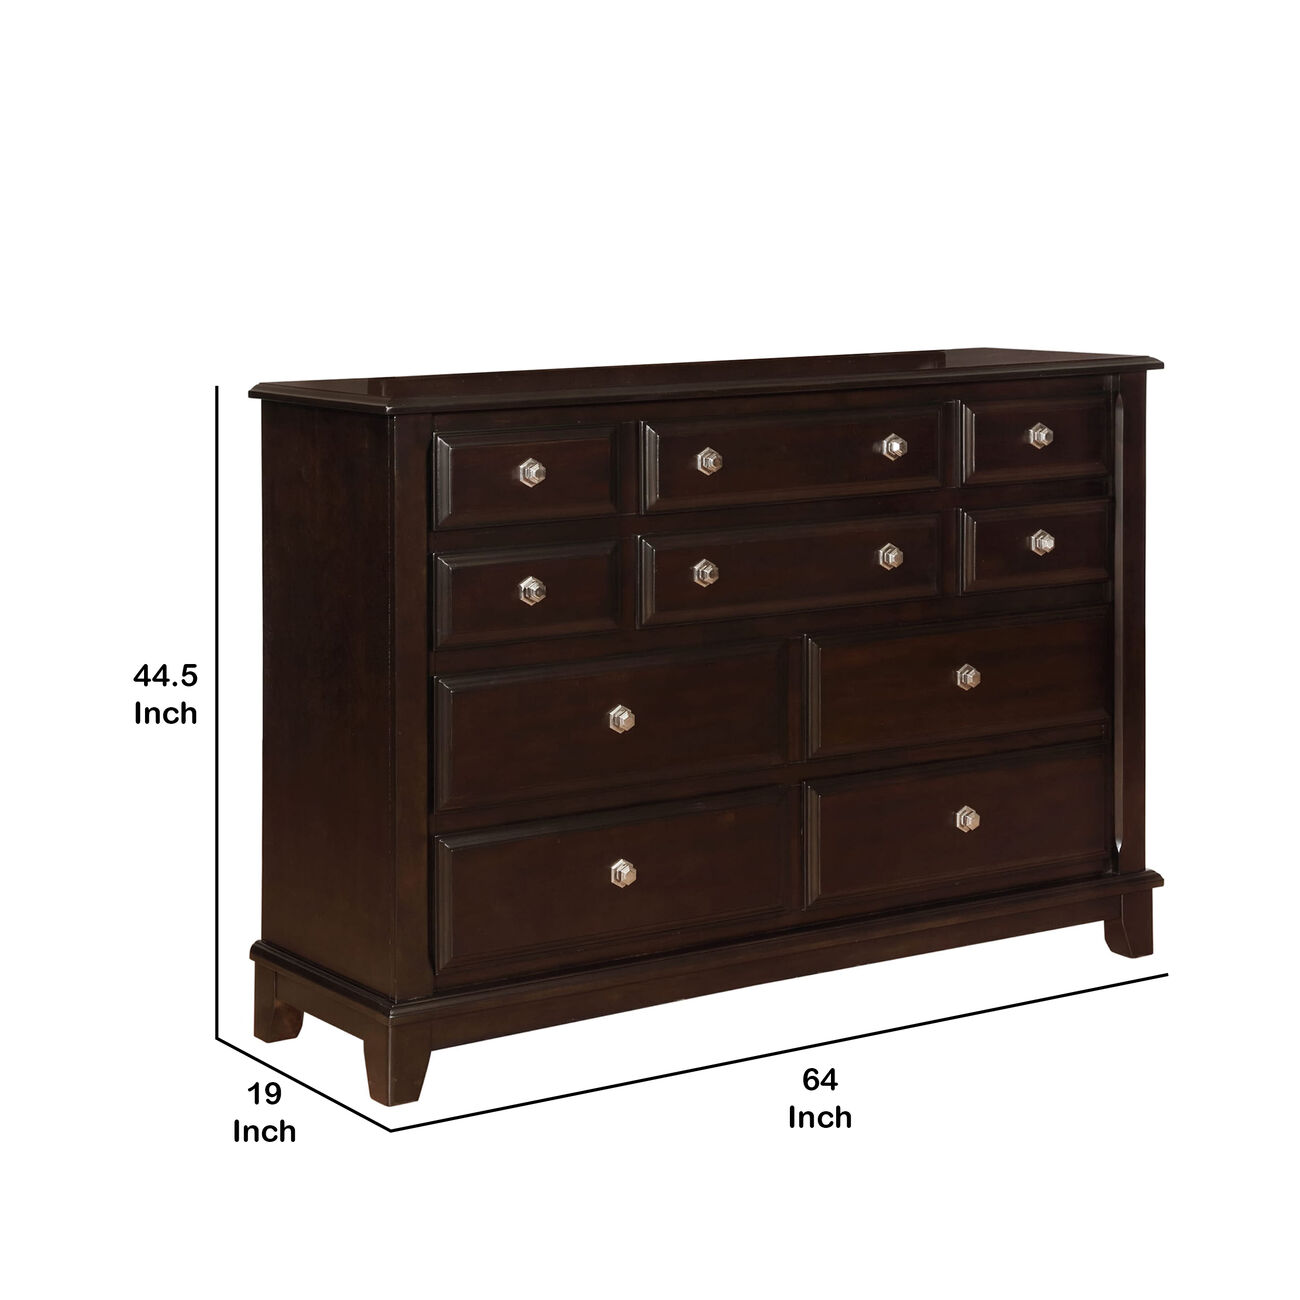 10 Drawers Wooden Frame Dresser with Hexagonal Pulls, Cherry Brown